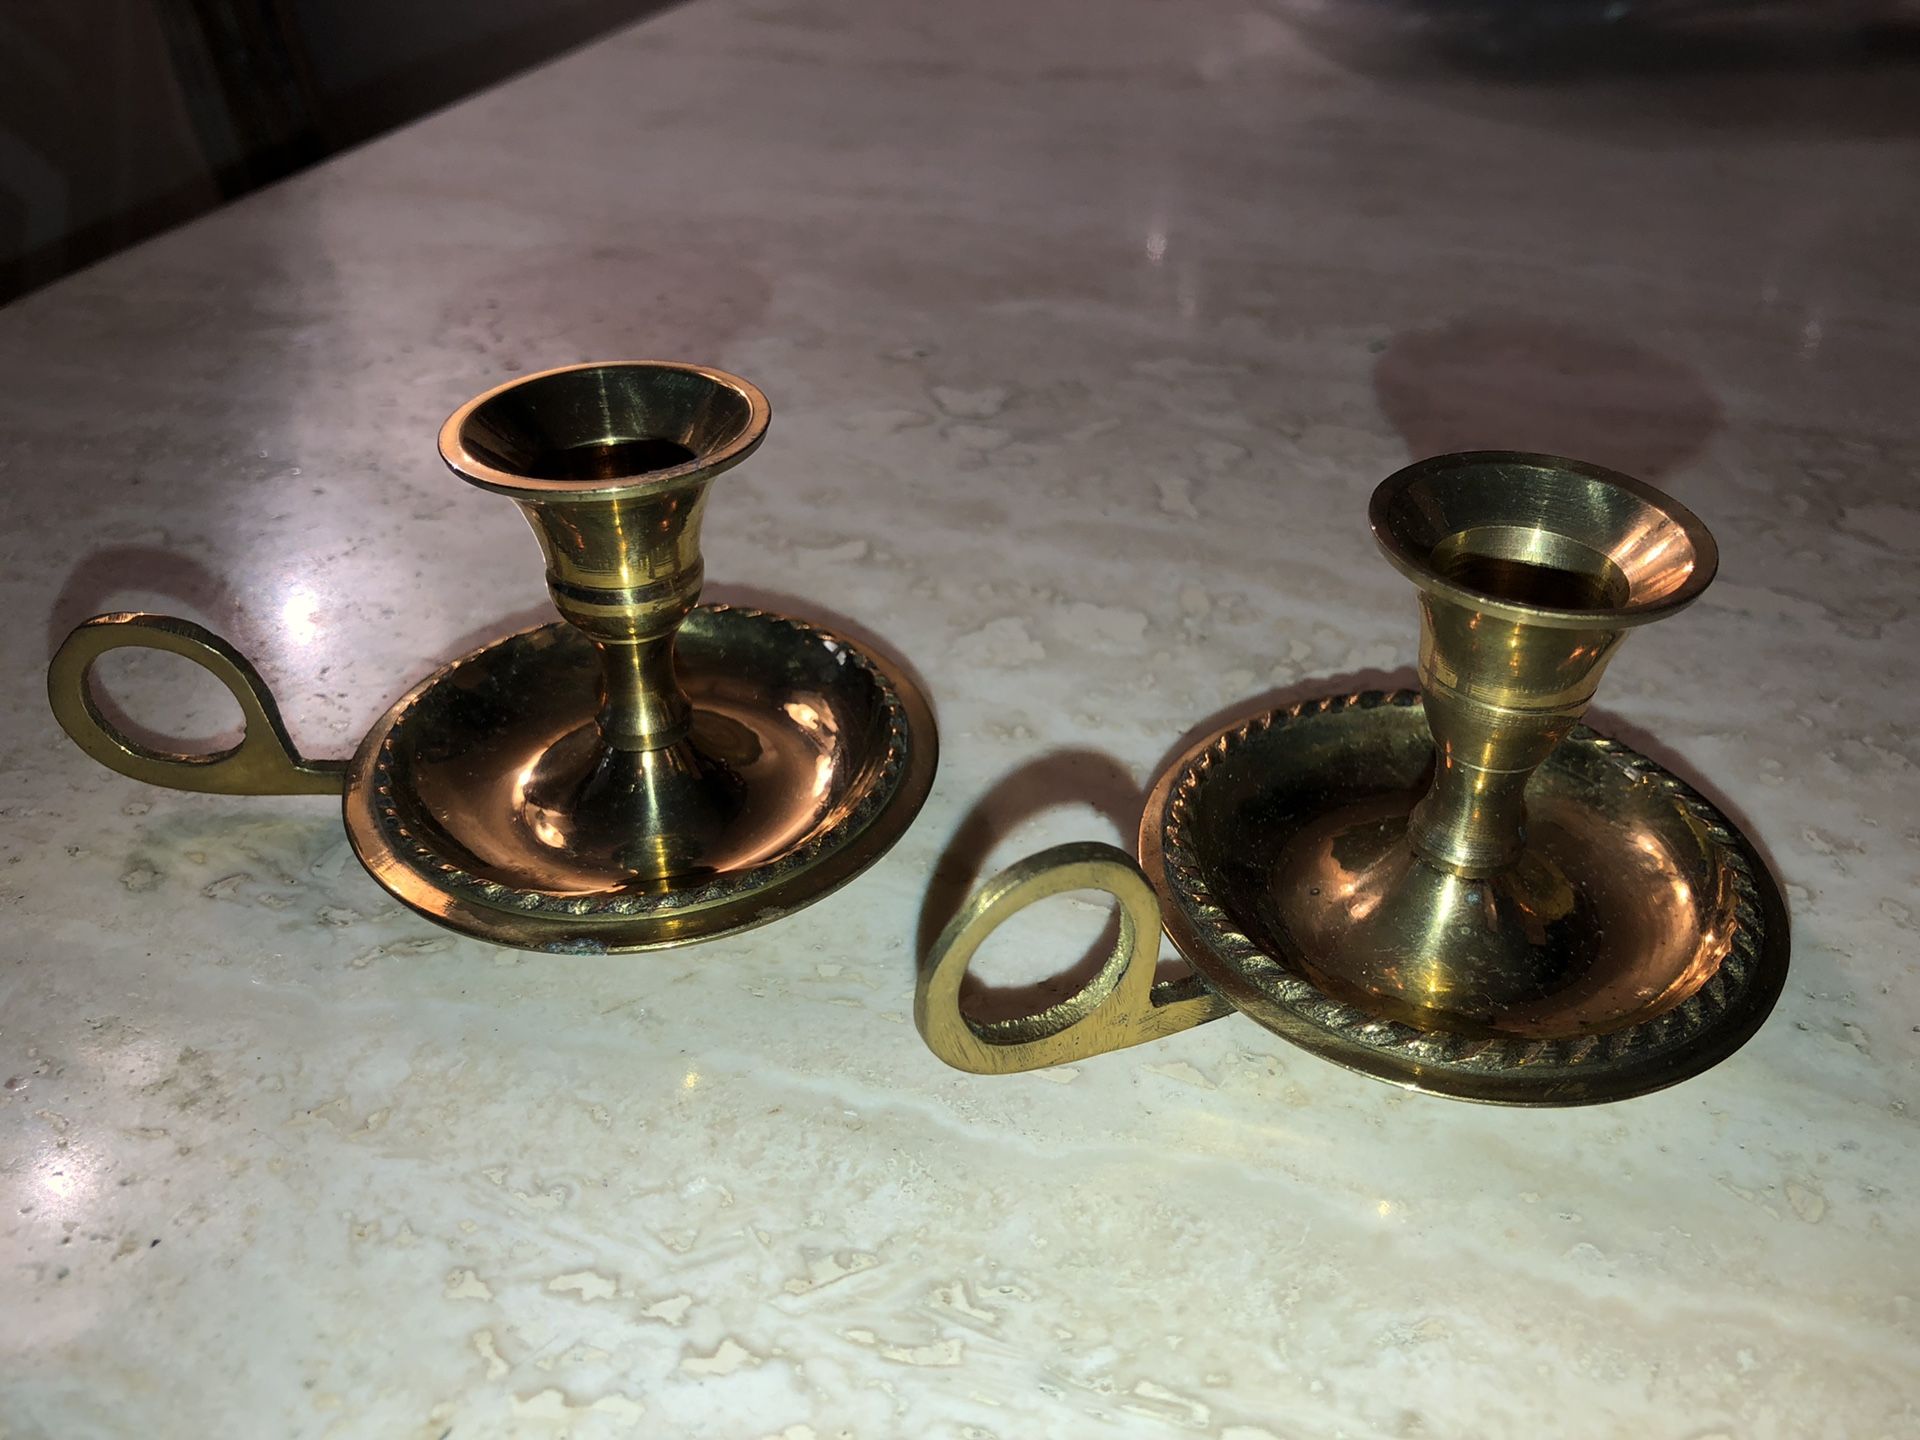 Vintage Solid Brass Candle Stick Holder Round Drip Dish w/ Finger Hold-3" tall by 5" wide